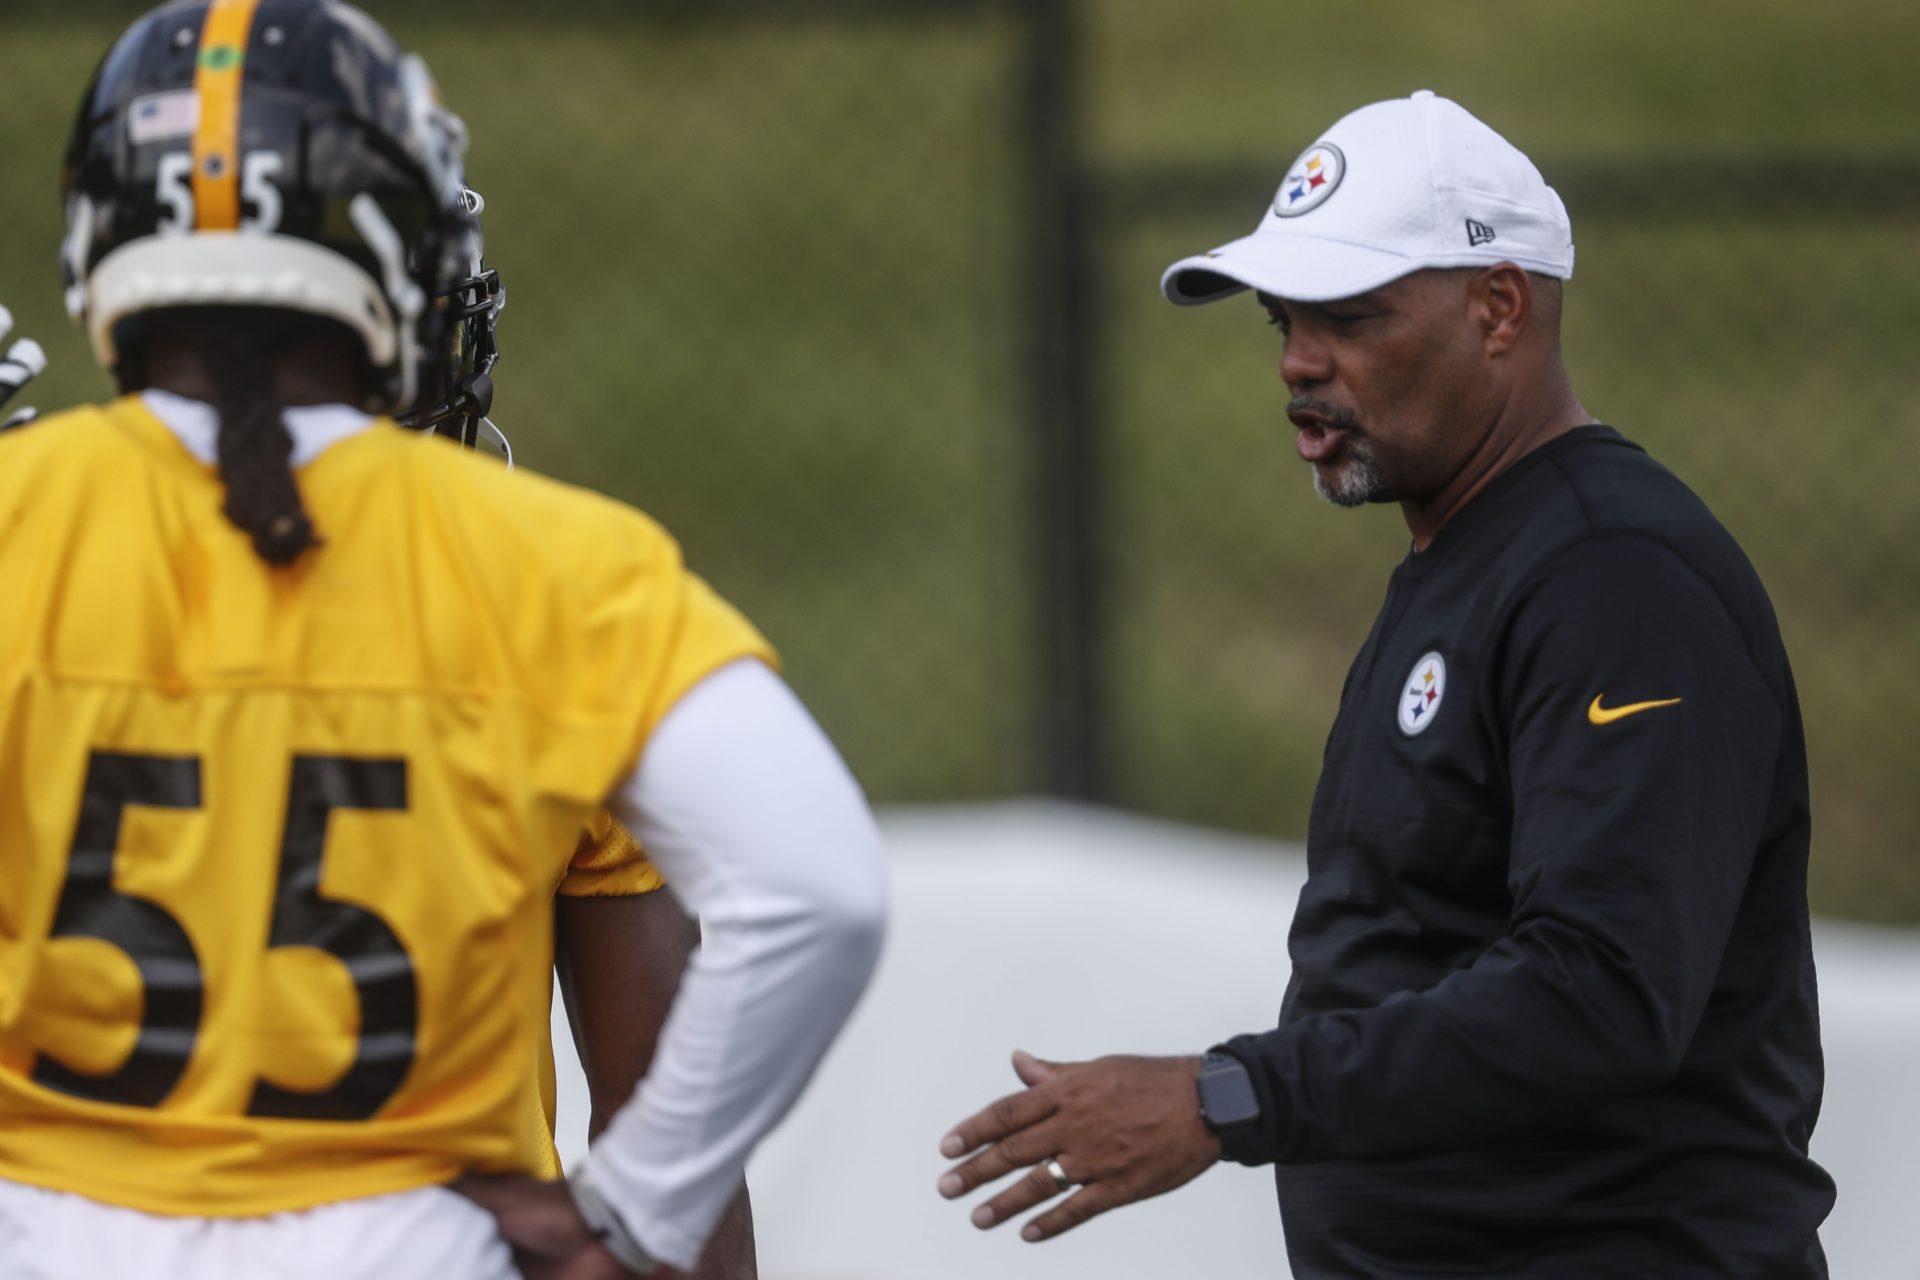 Pittsburgh Steelers senior defensive assistant for the secondary coach Teryl Austin, right, during an NFL football training camp practice in Latrobe, Pa., Friday, July 26, 2019.